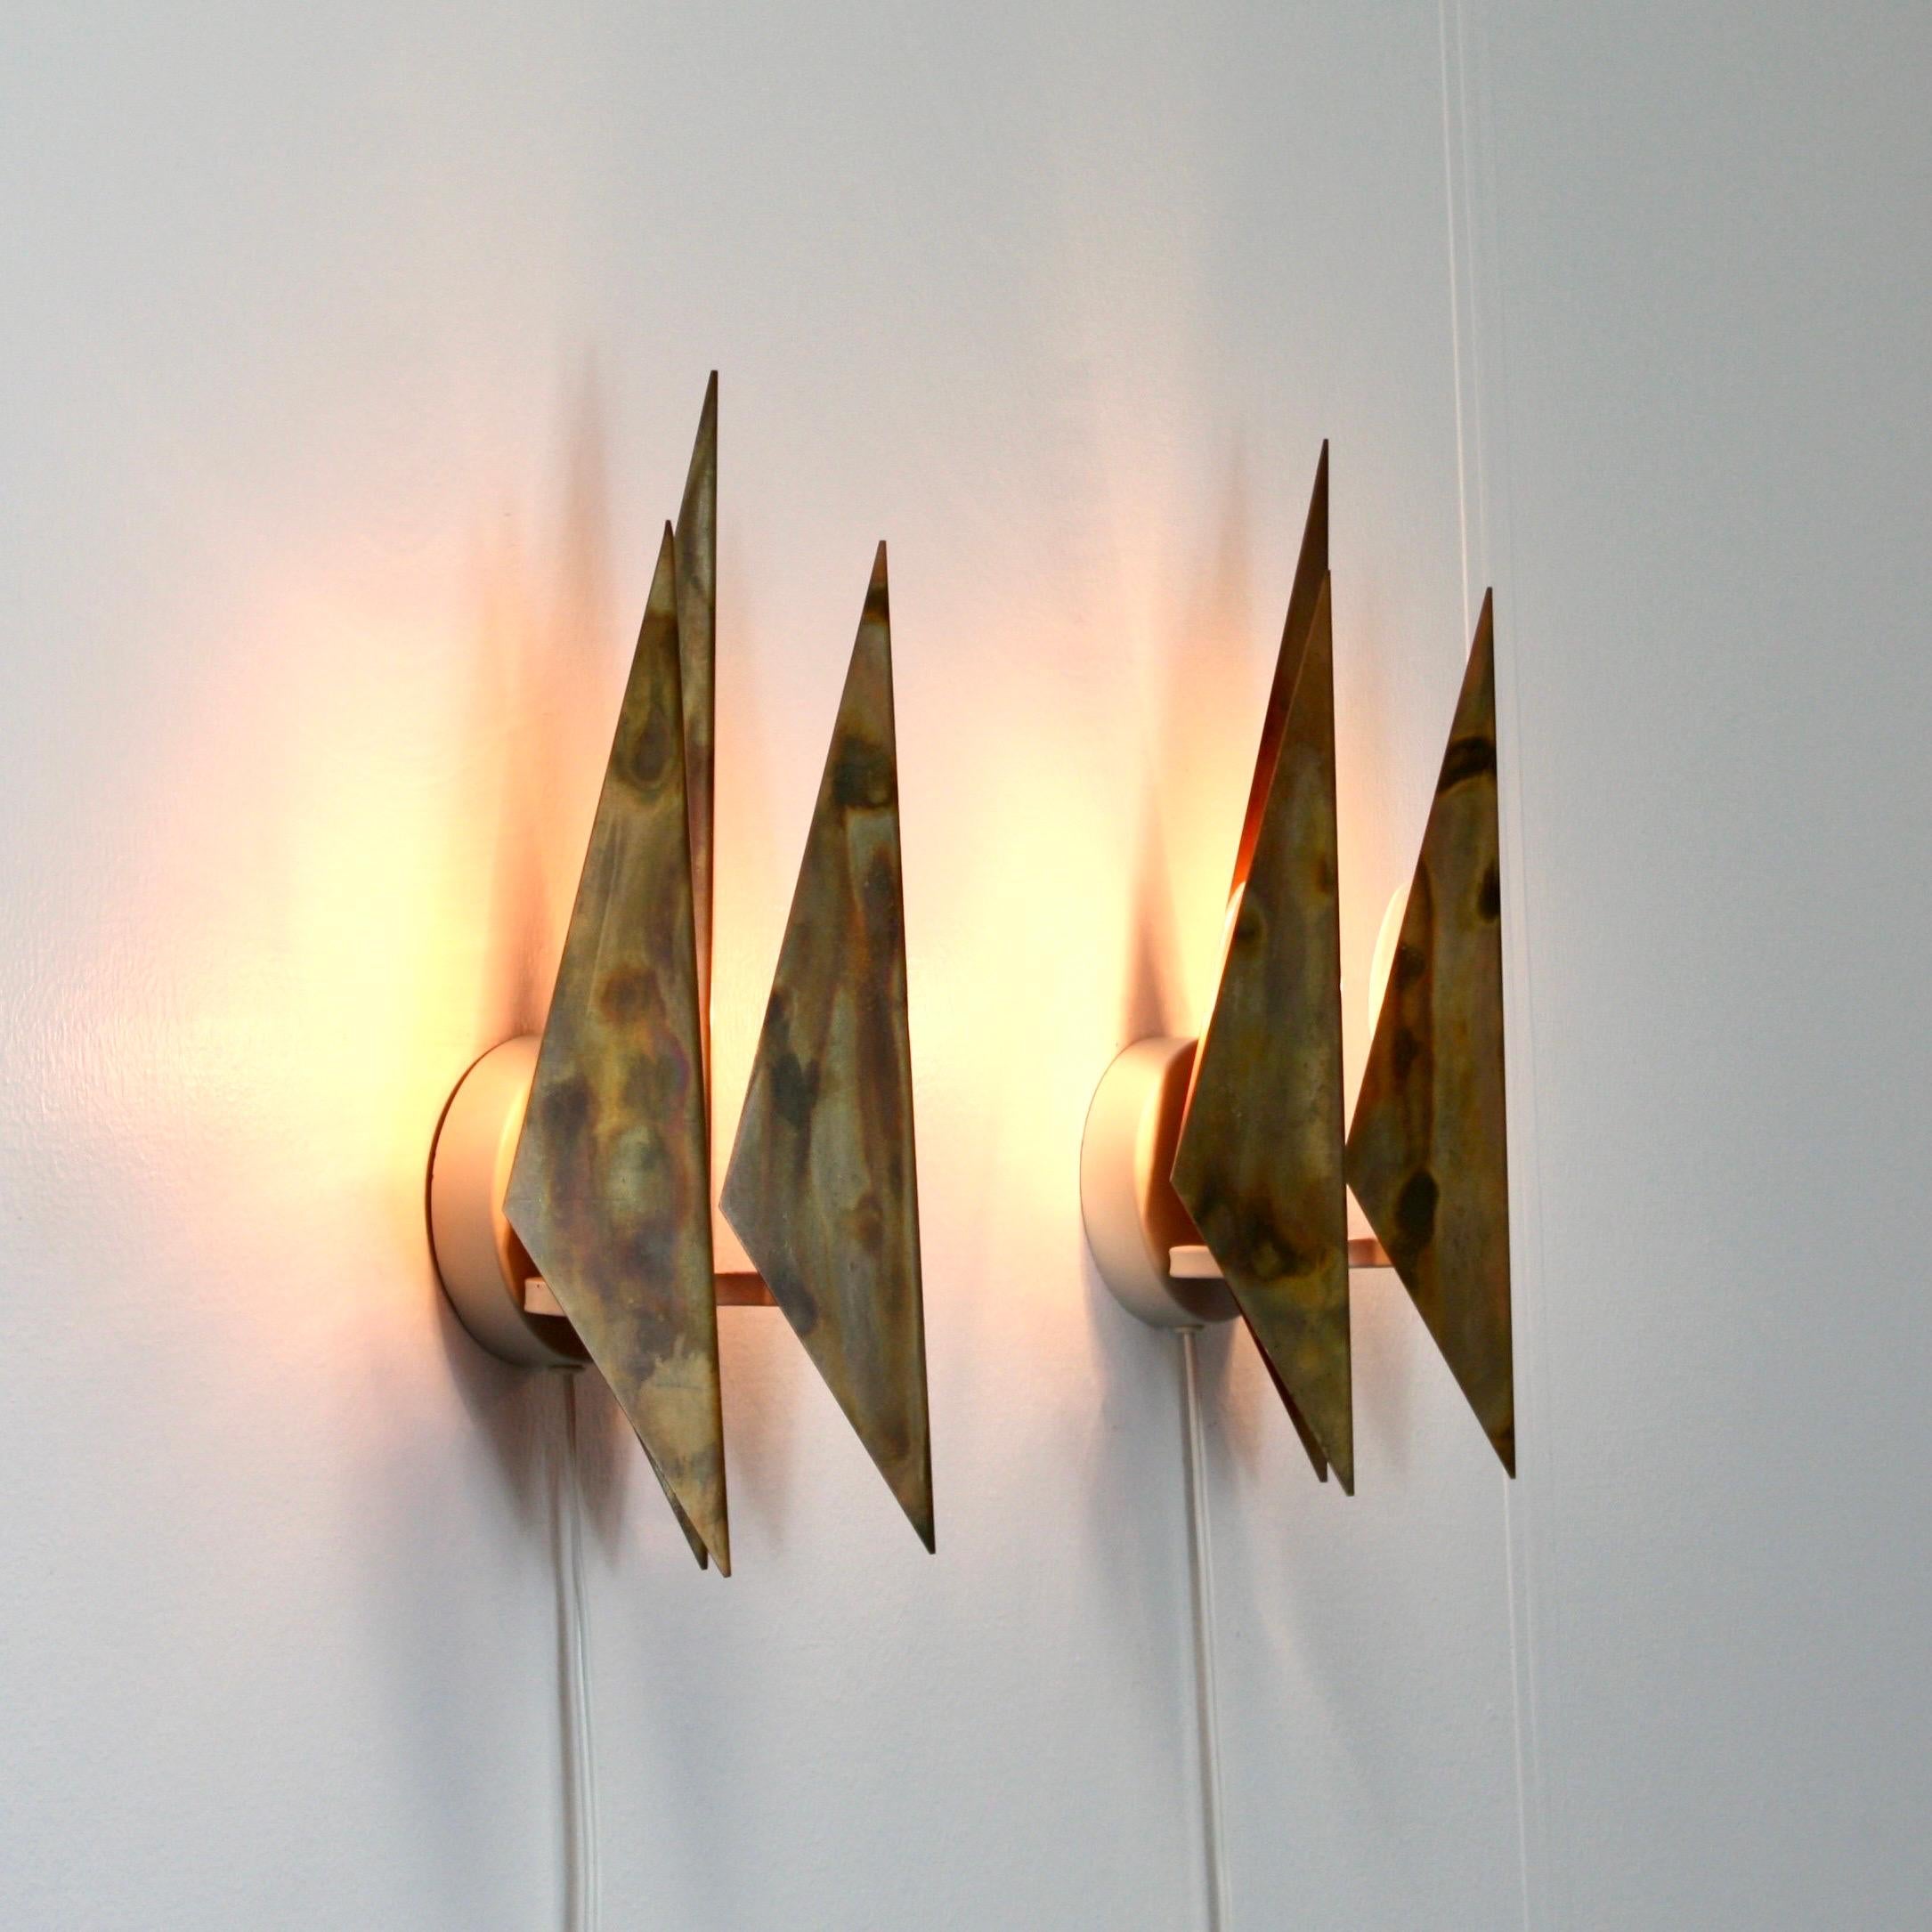 Pair of Copper Wall Lamps by Svend Aage Holm Sorensen, 1960s, Denmark For Sale 4